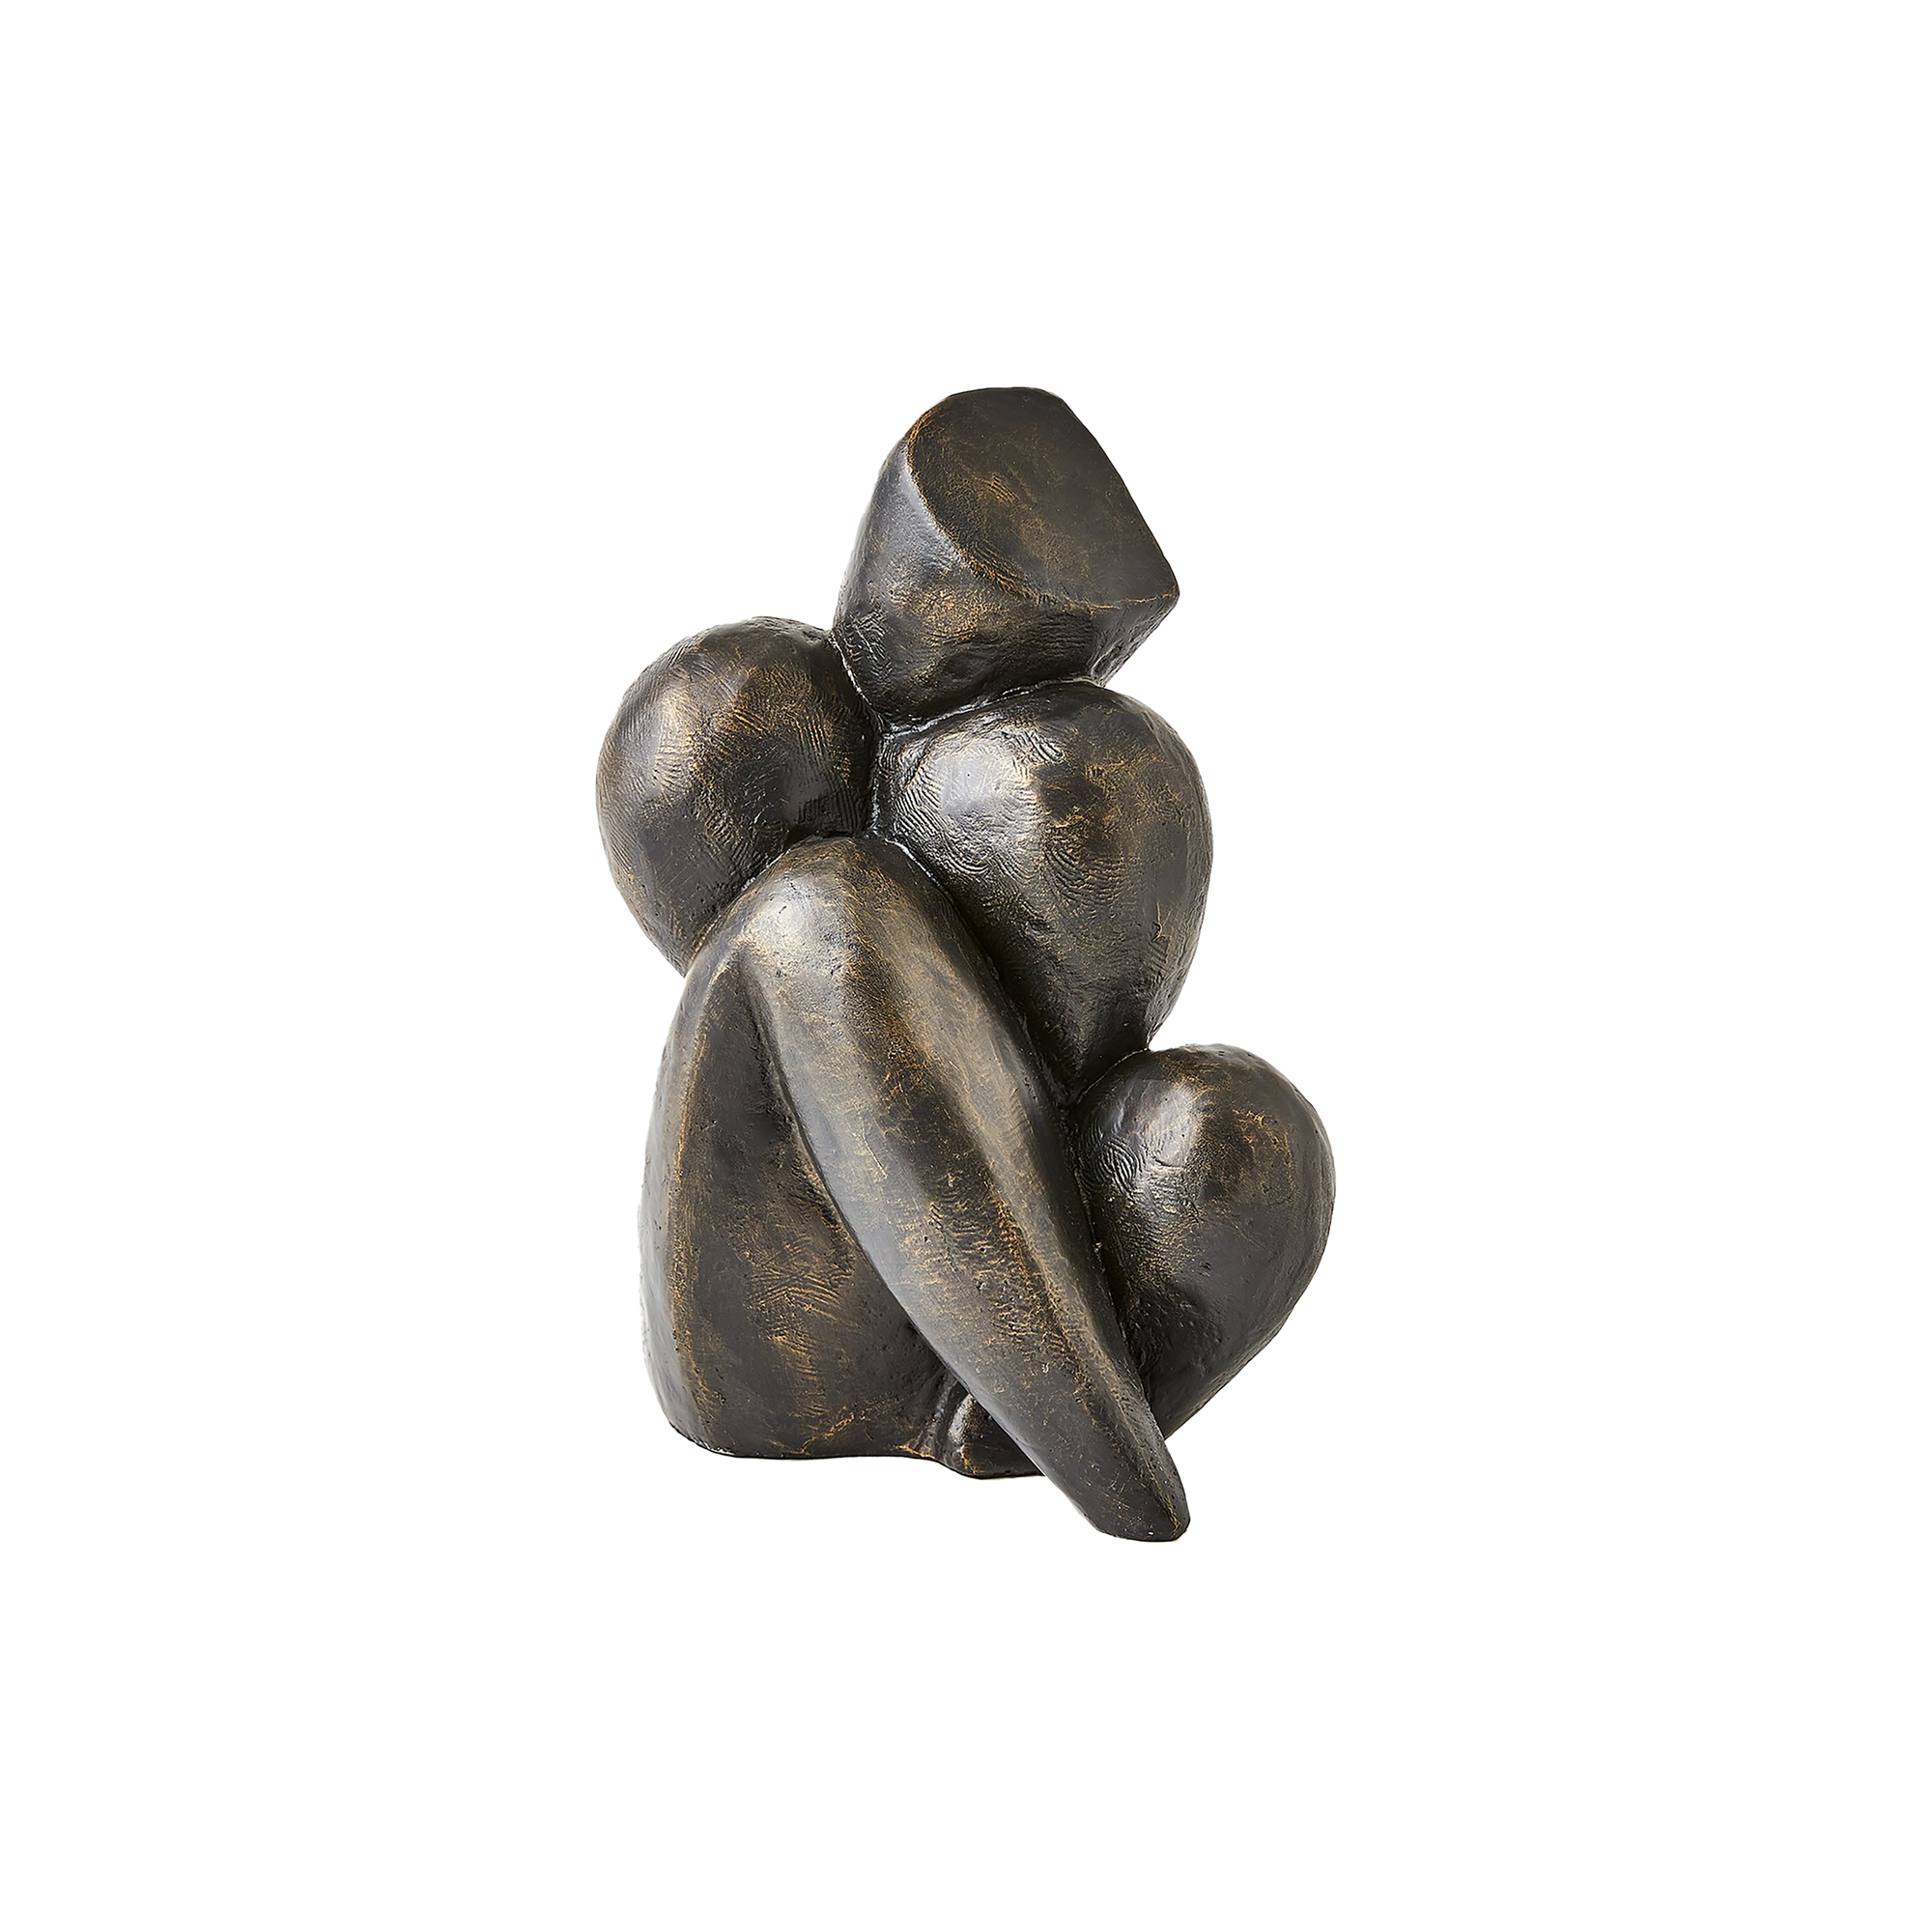 In a study of the beauty of human forms, the Figural Sculpture uses simple and pleasant shapes to define a elegant portrait.